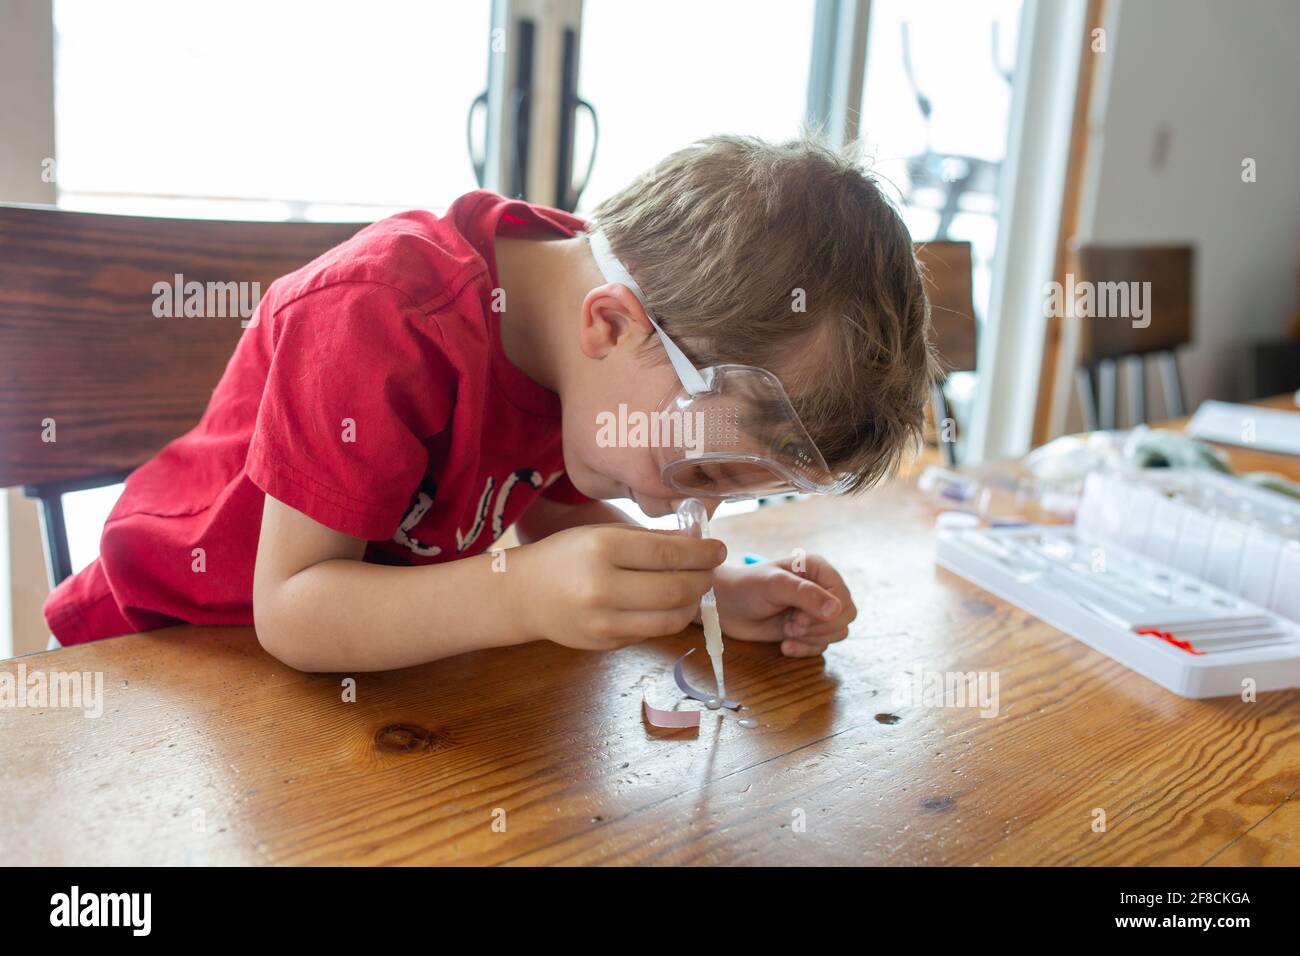 Boy leaning over chemistry set he is playing with Stock Photo